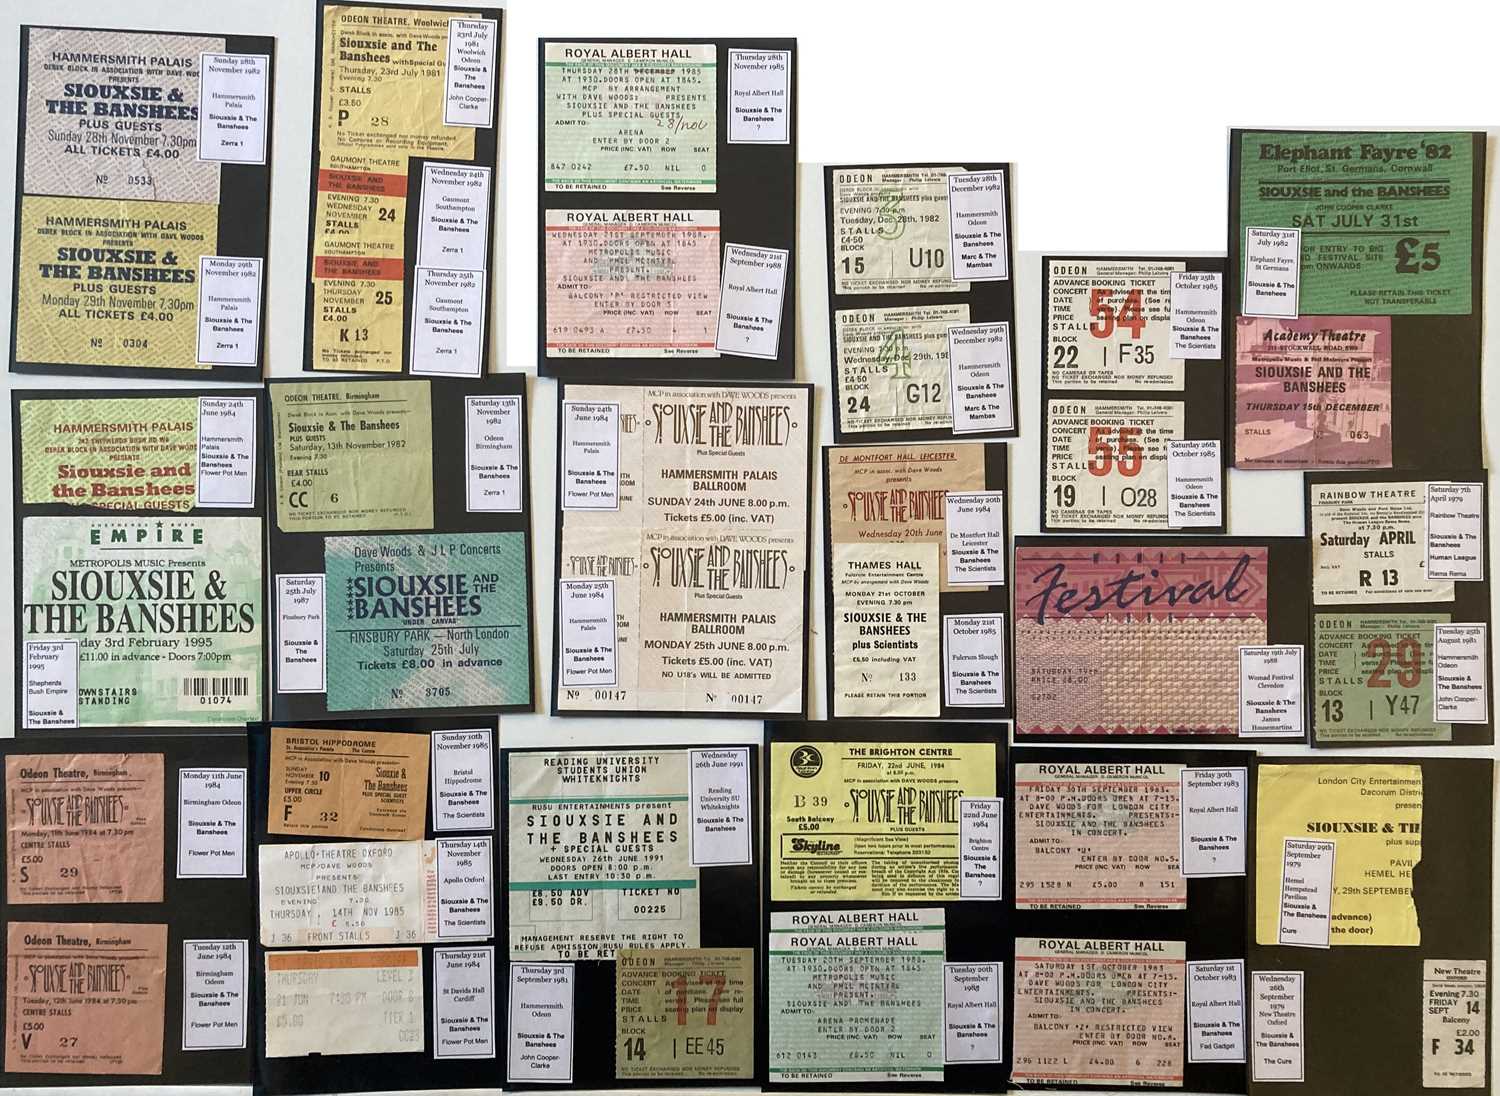 Lot 103 - SIOUXSIE AND THE BANSHEES CONCERT TICKET ARCHIVE.